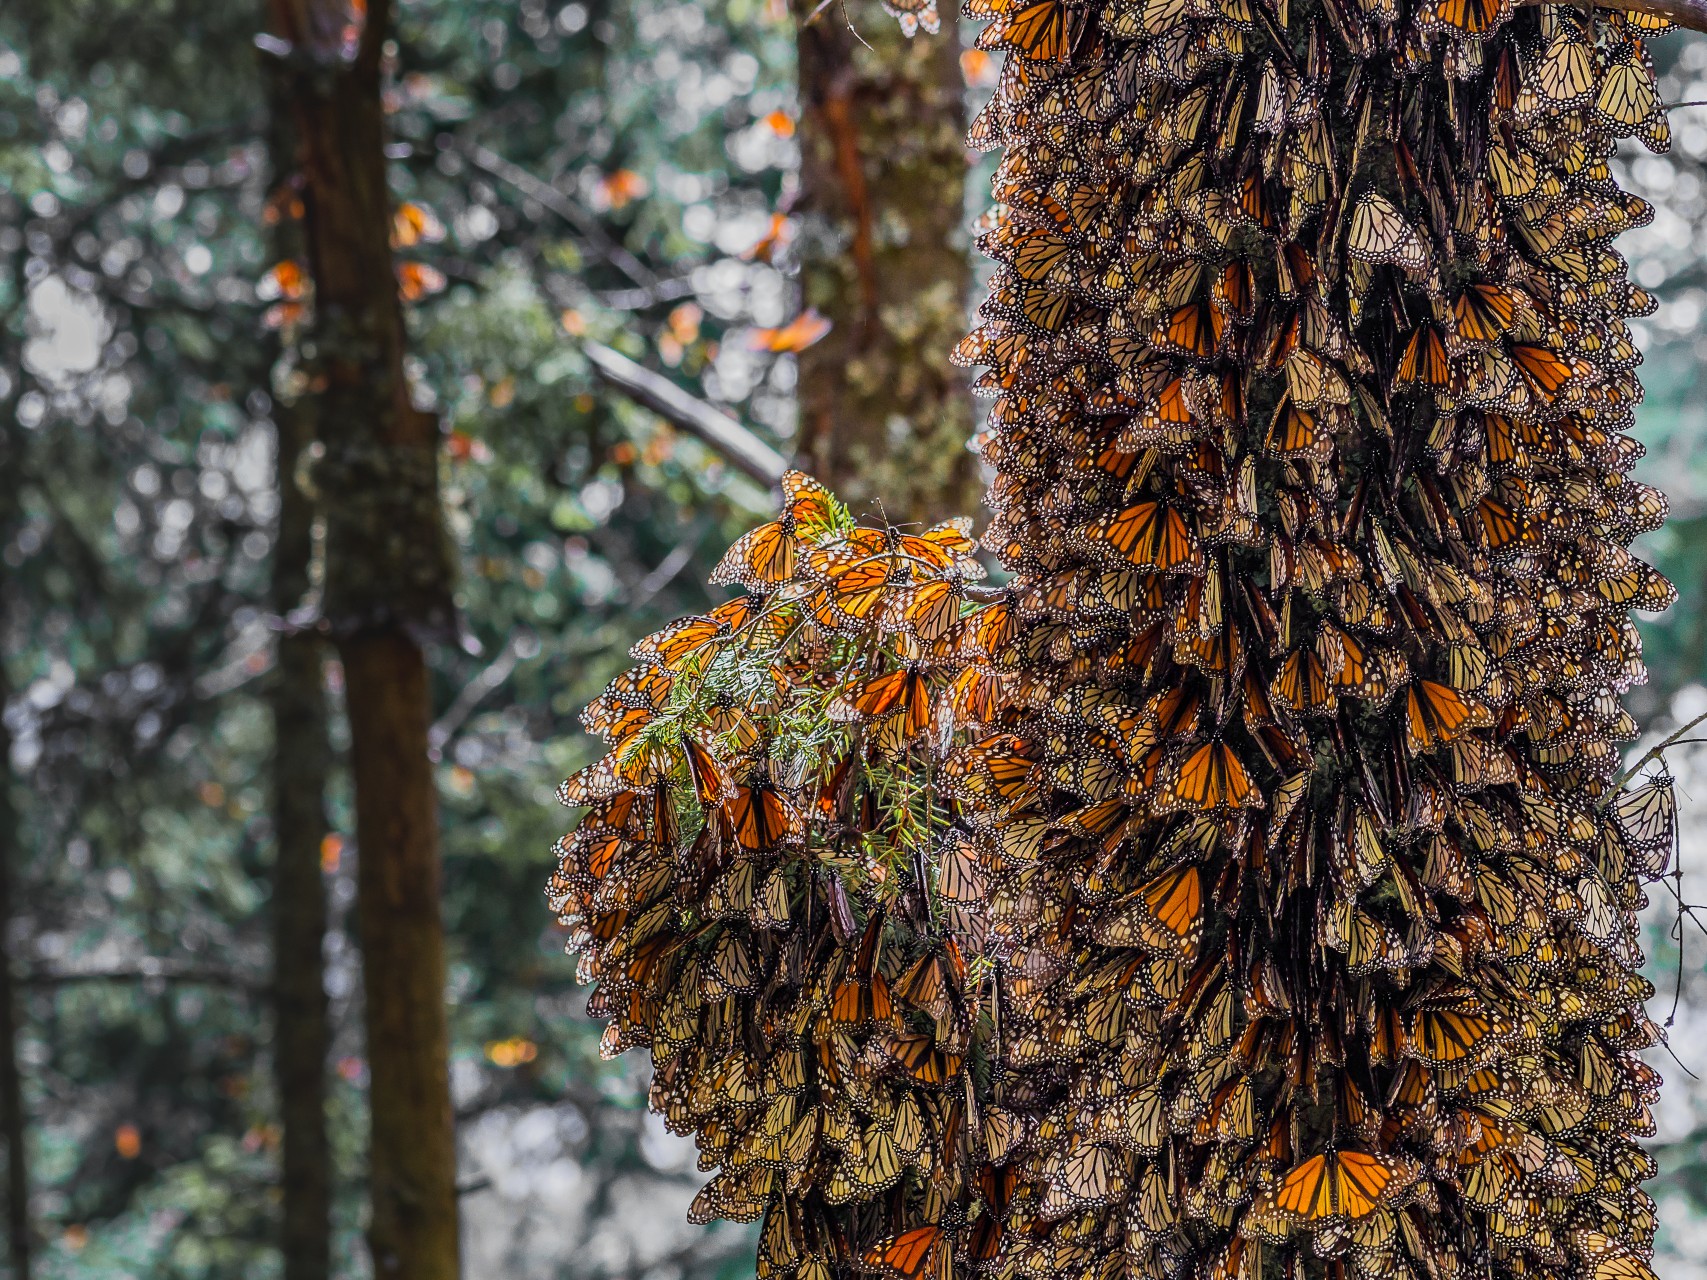 Monarch butterflies are beloved—and declining for this sad reason